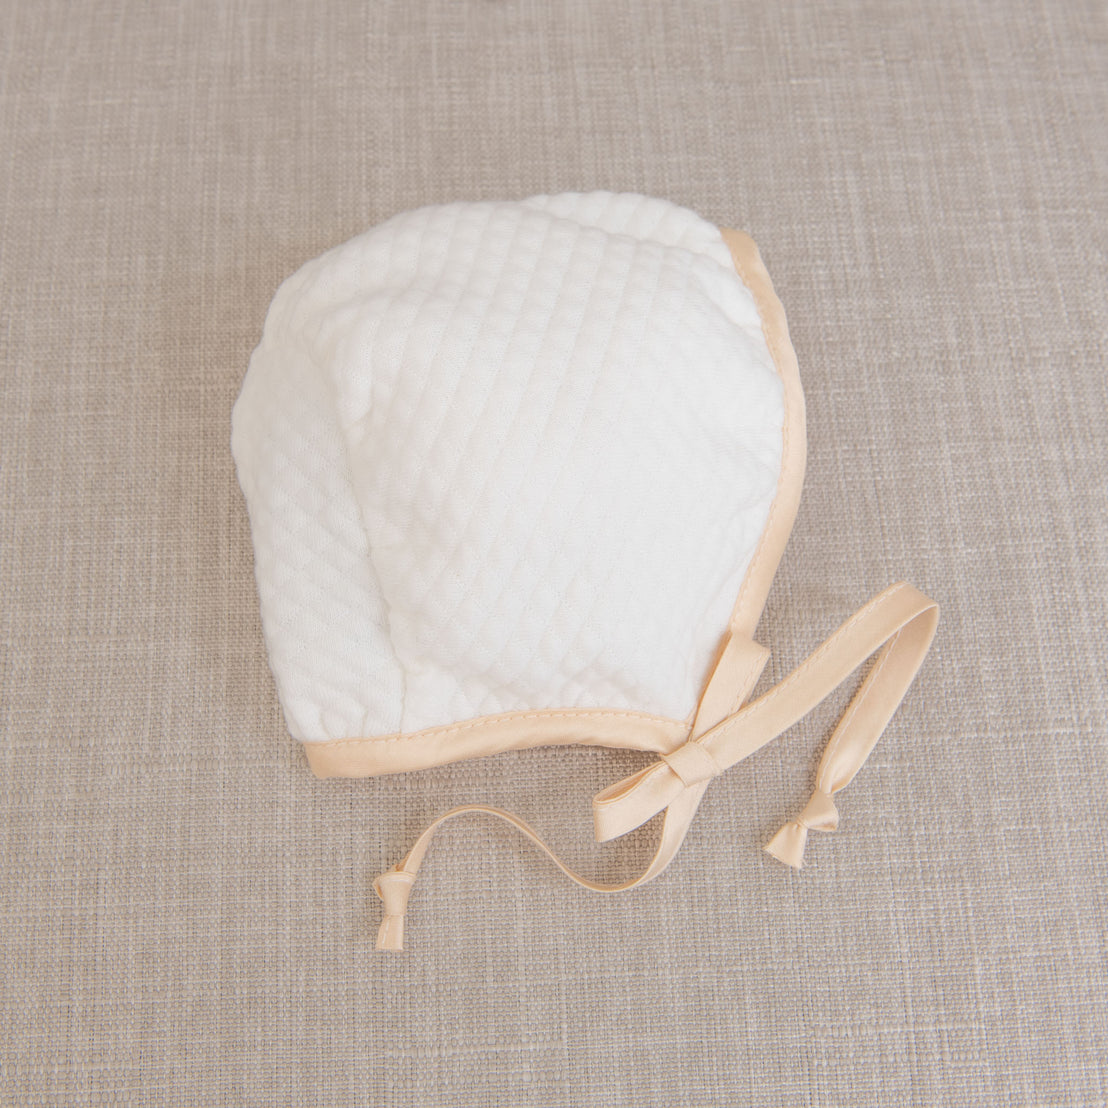 Flat lay photo of the Liam Quilted Newborn Bonnet made with soft quilted cotton in ivory and trimmed with a champagne colored silk